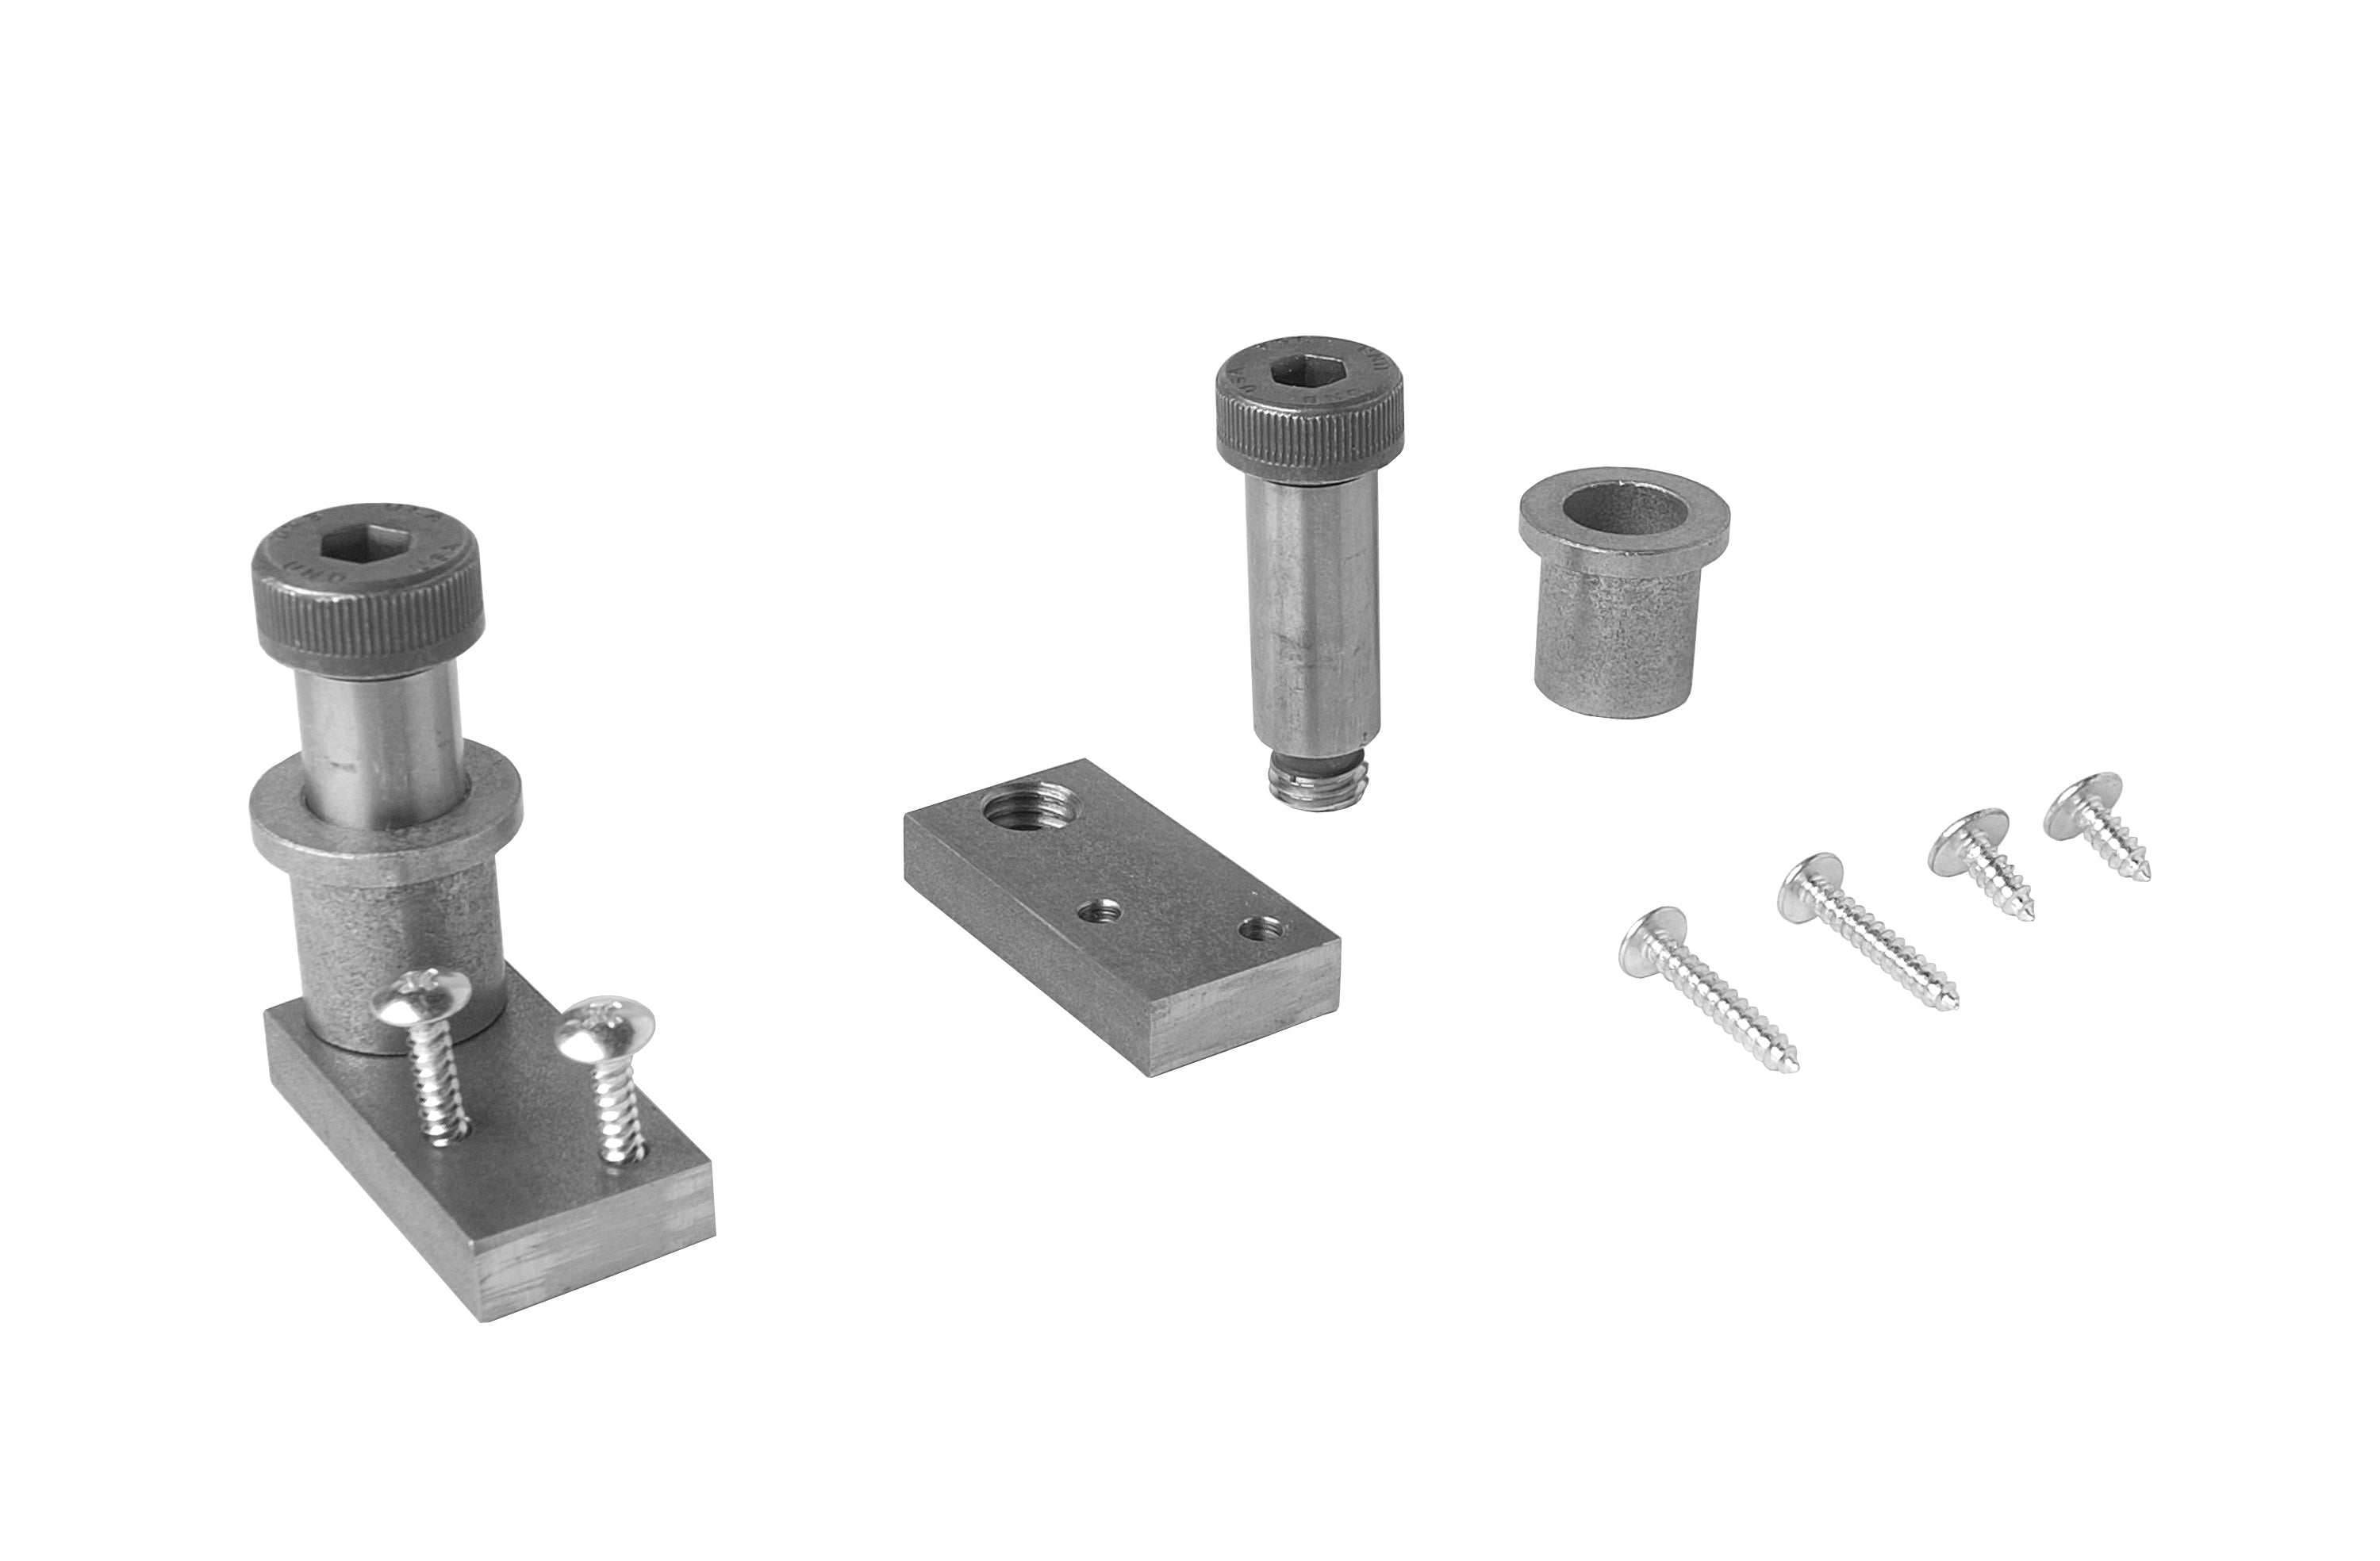 Drill Press Kit for Use with Euro-Drill - Euro Limited